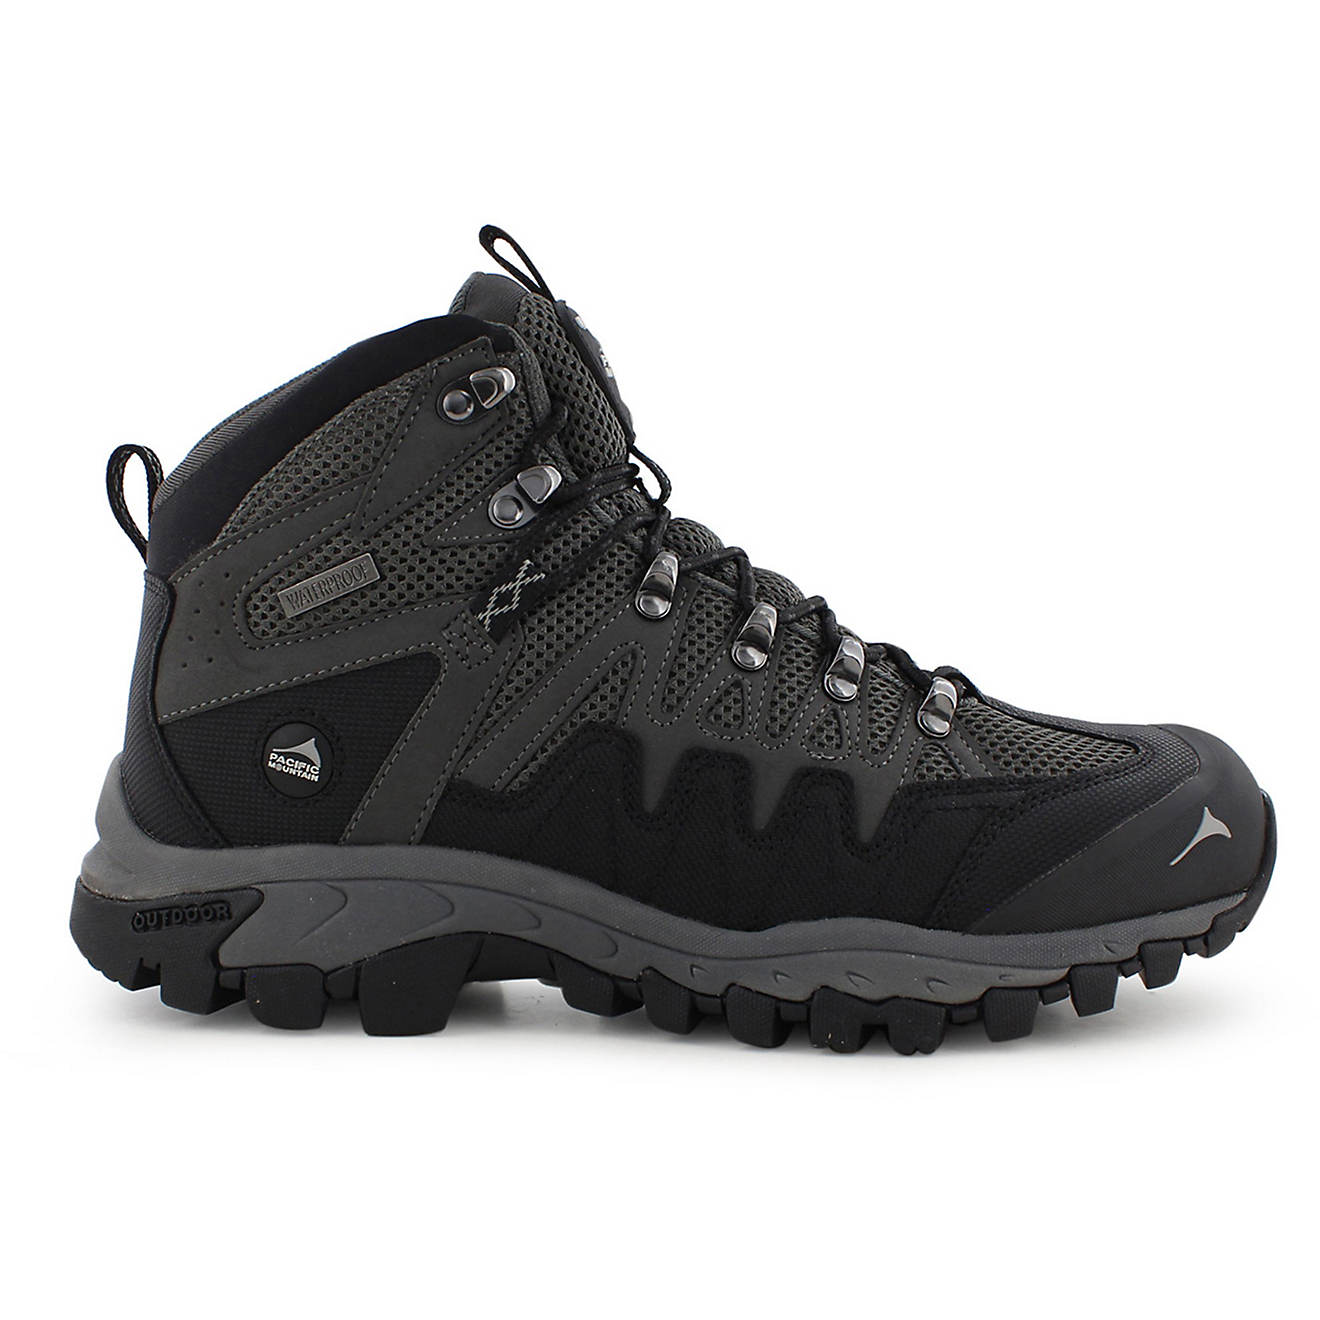 Pacific Mountain Men's Emmons Mid Waterproof Hiking Shoes | Academy